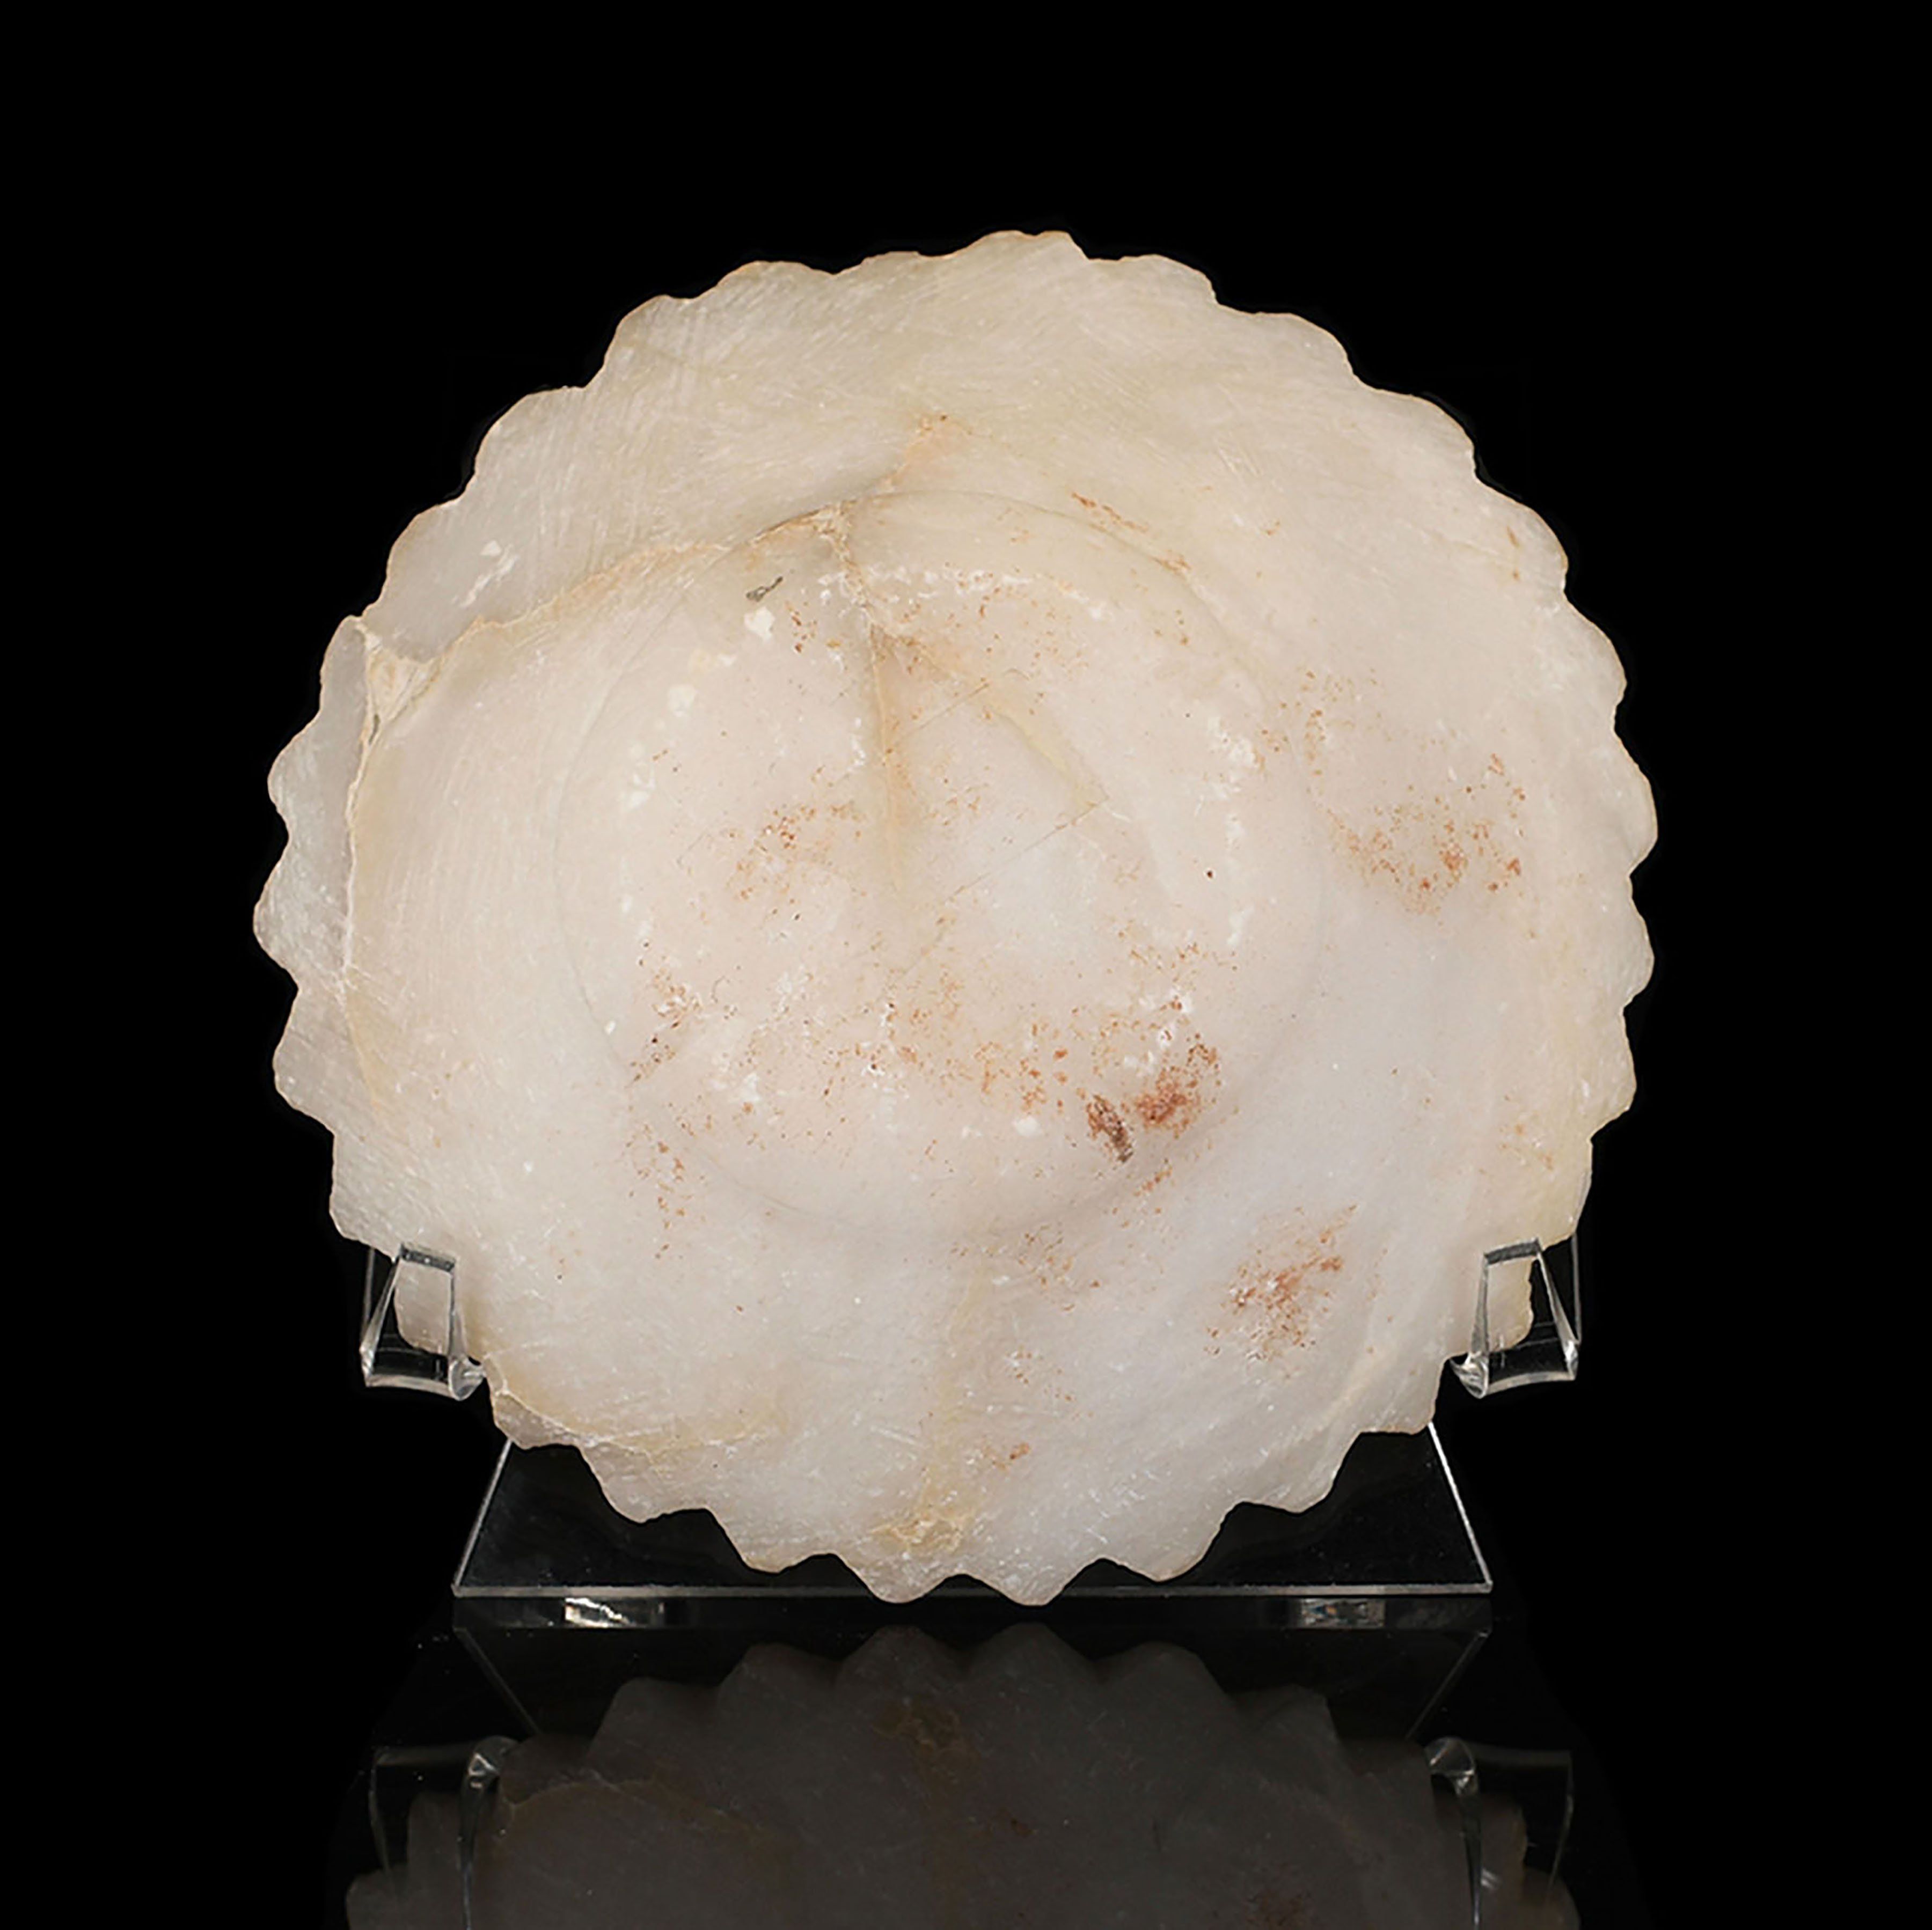 * A Sumerian Alabaster Scalloped-Edged Bowl, Early Dynastic IIIa, ca. 2600 – 2500 BCE - Sands of Time Ancient Art